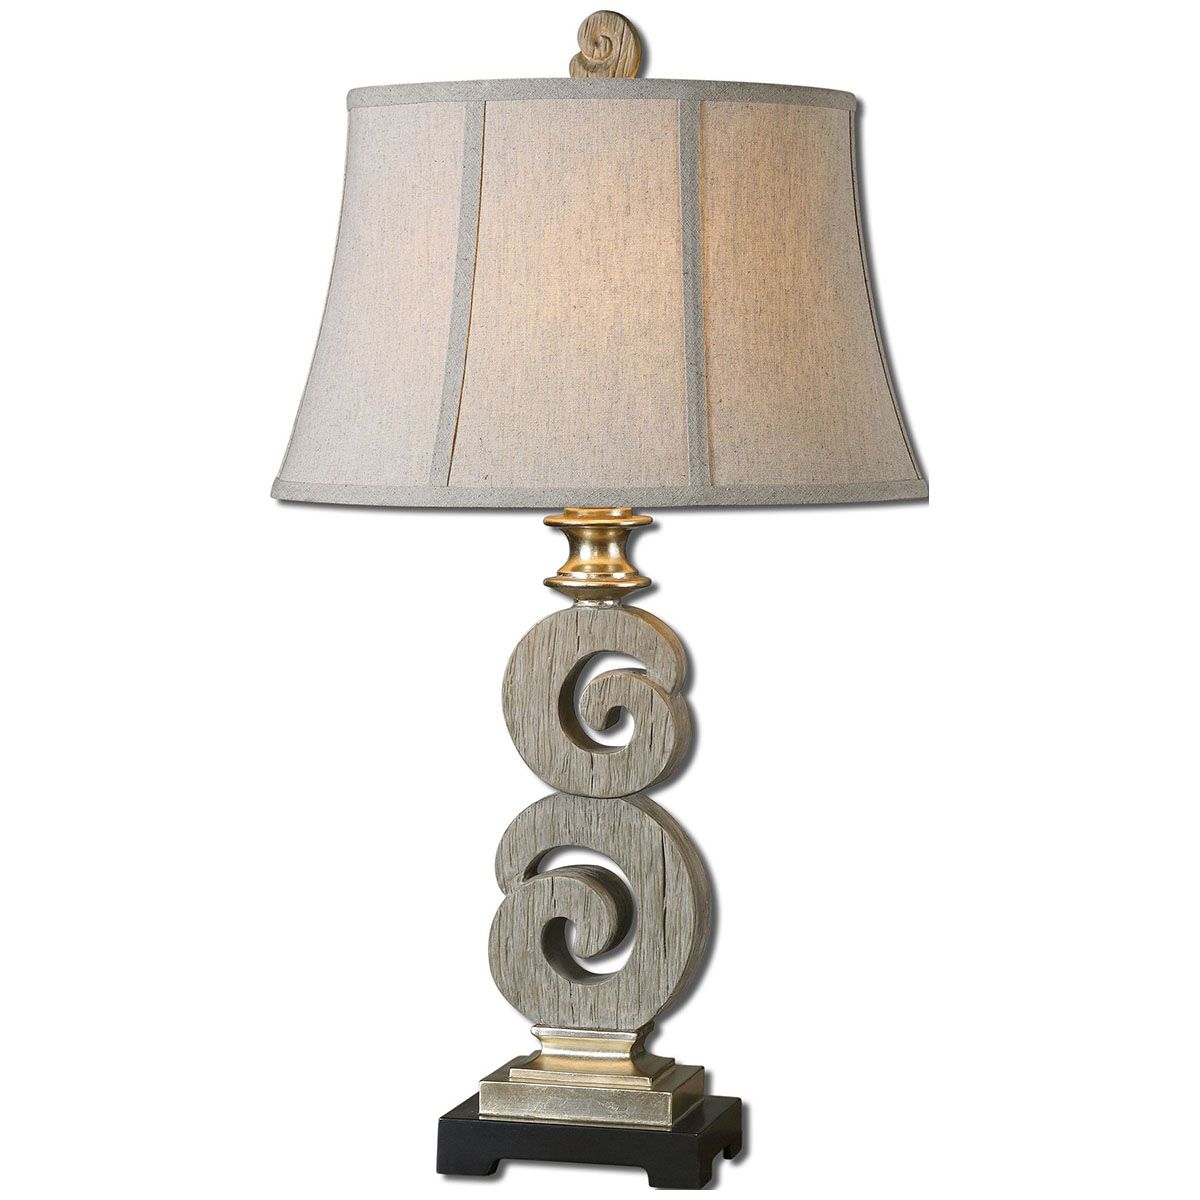 uttermost delshire wood table lamp gin cube accent ethan allen round pier one imports tables patio console mission style tiffany lamps black and white rug brass hairpin legs drop